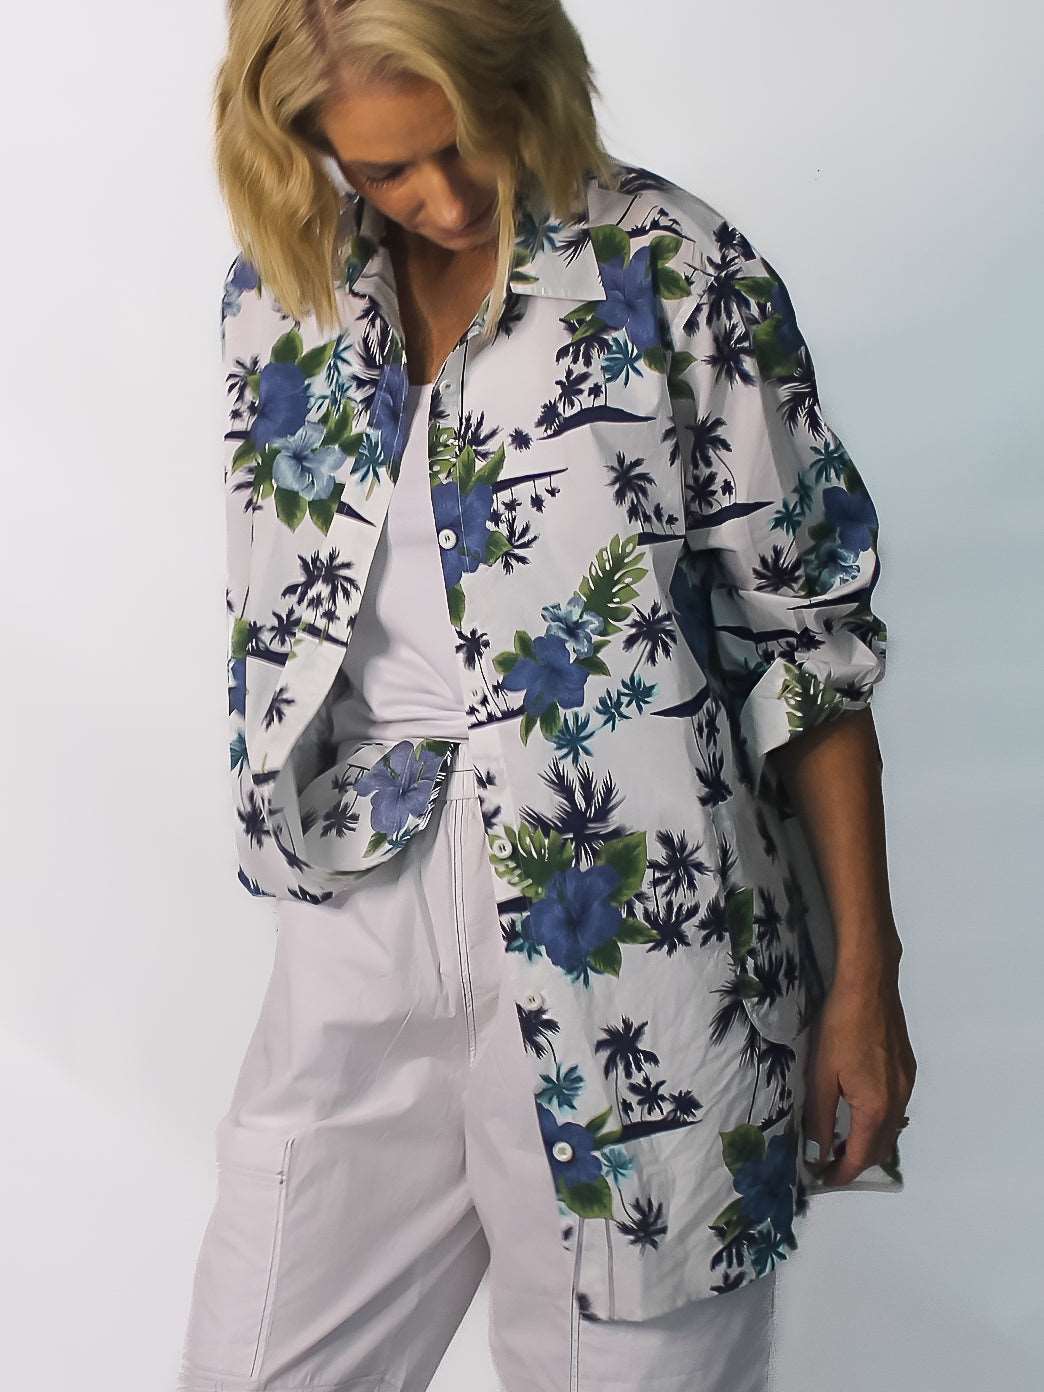 woman in white, tropical print button up shirt